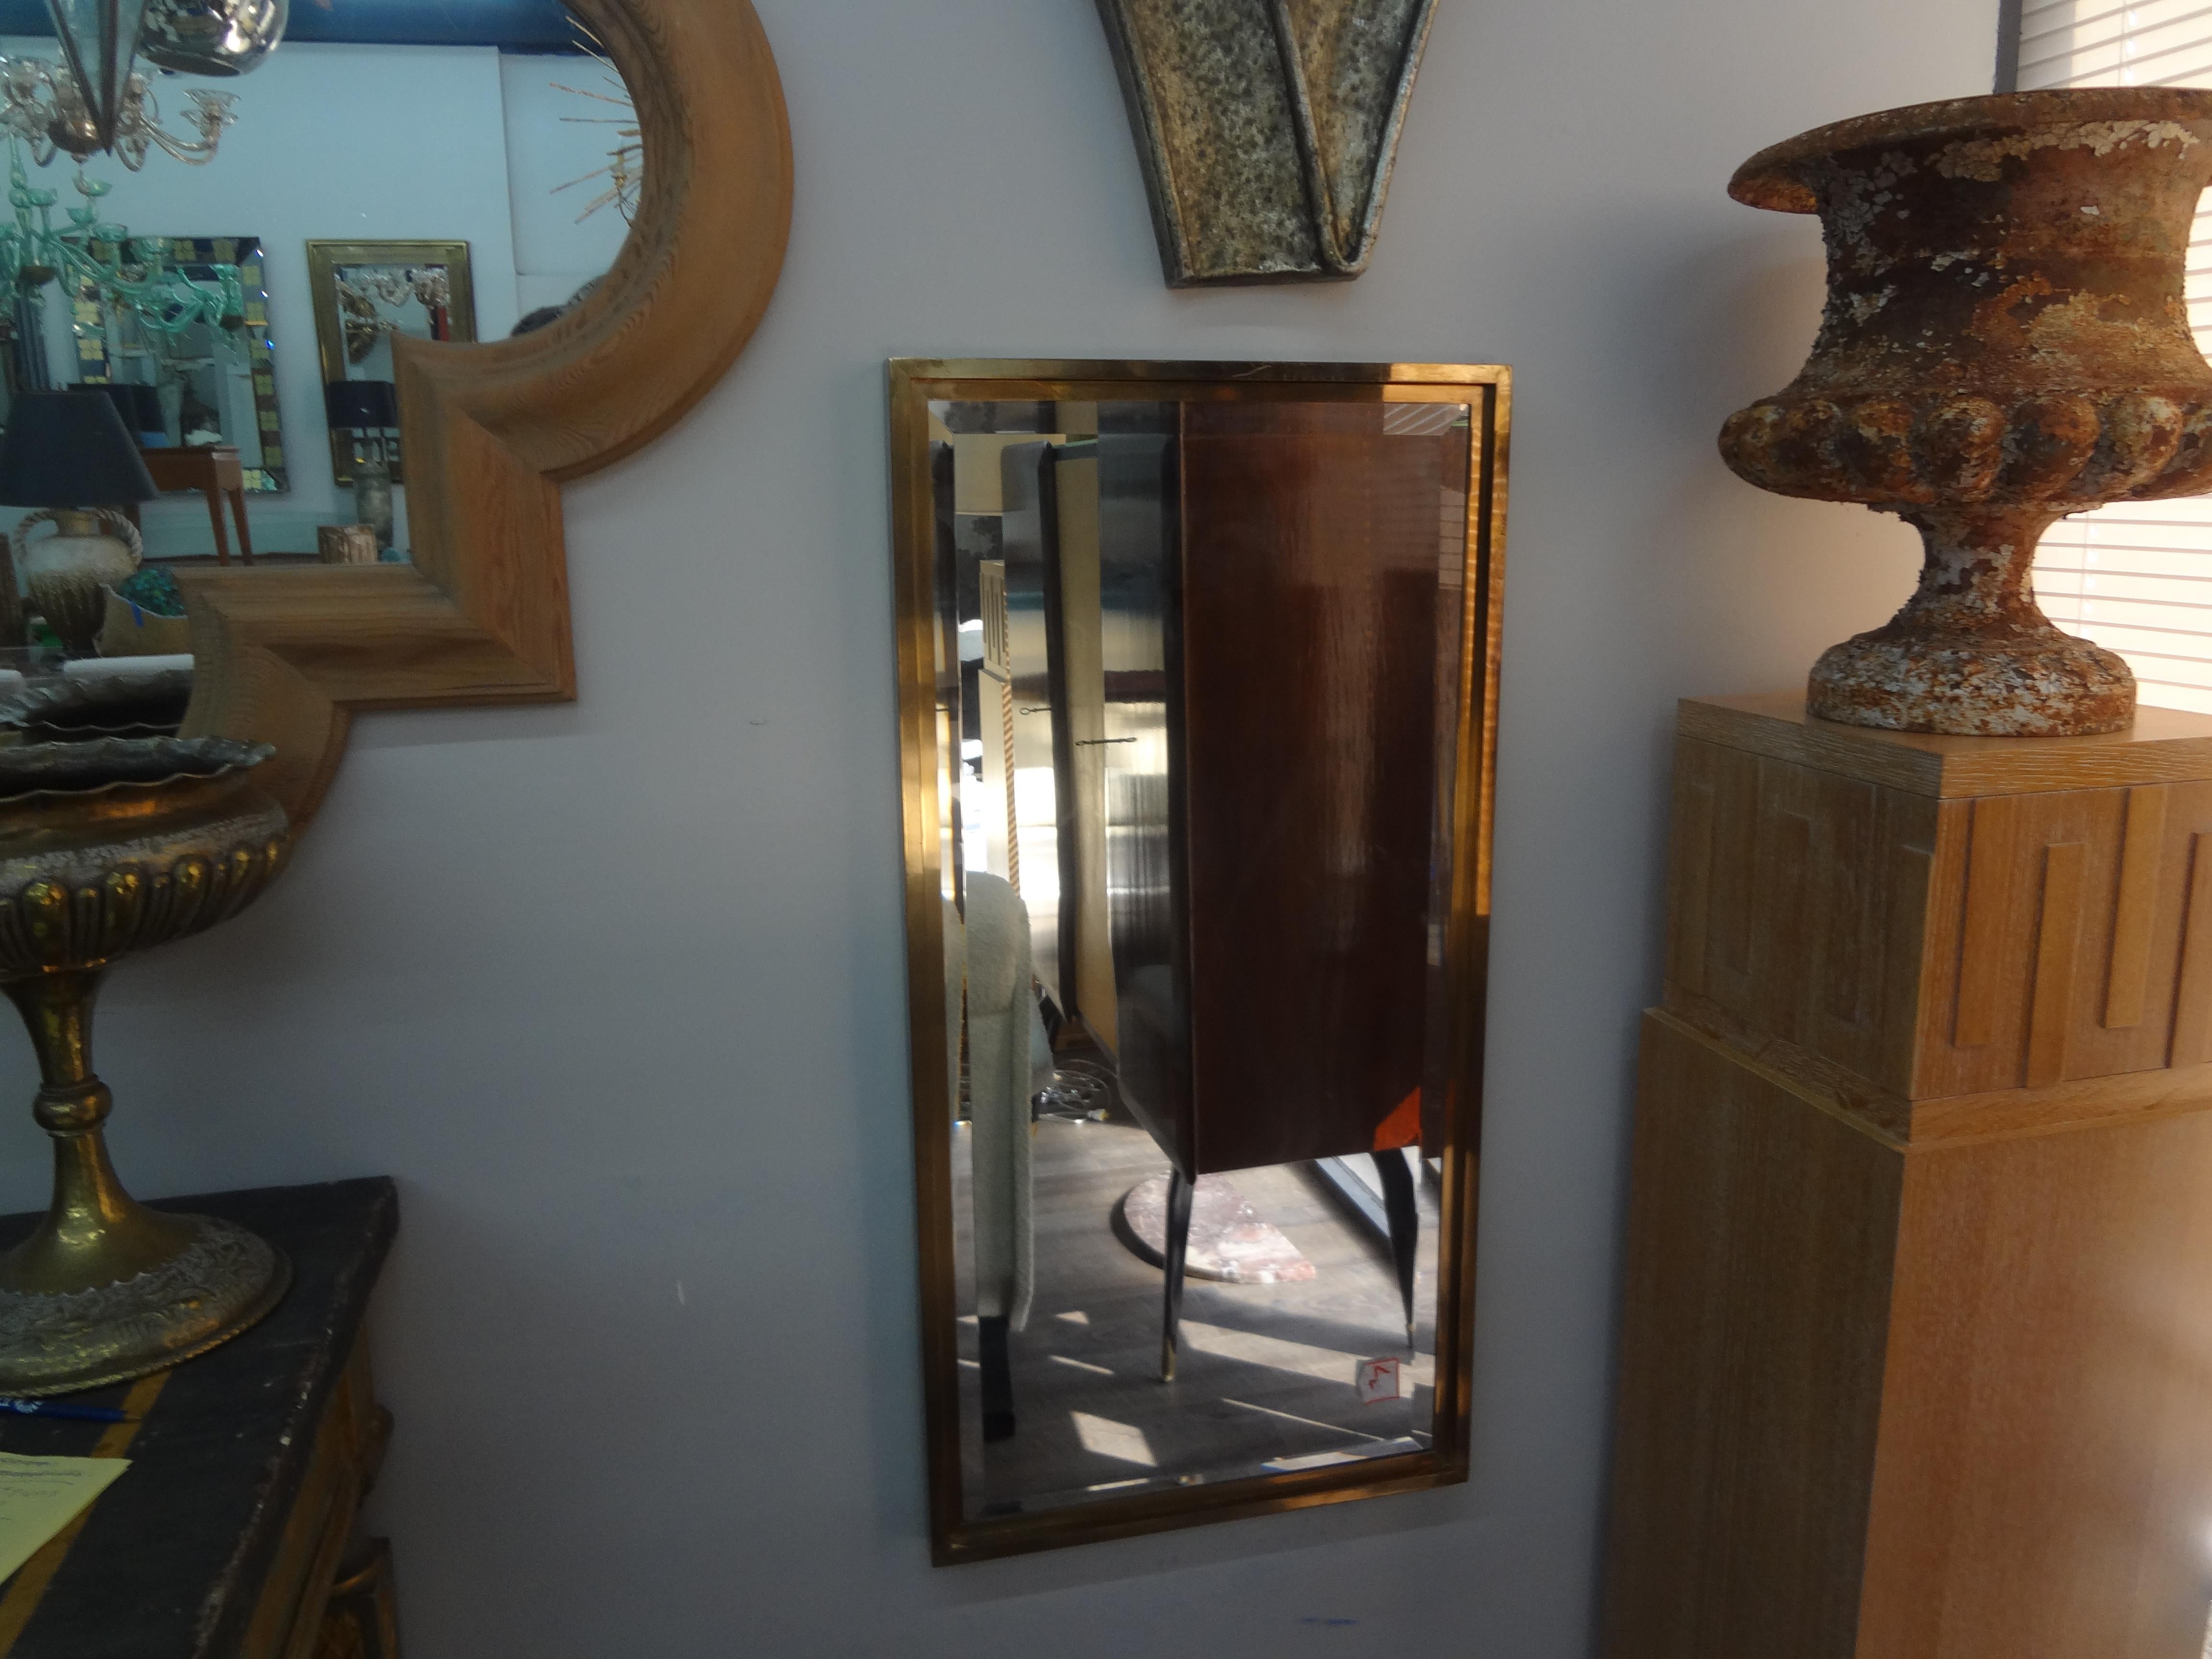 Italian Modern Brass Beveled Mirror.
Handsome Italian brass beveled mirror
This lovely Italian modern Gio Ponti inspired brass mirror dates to the 1960's and has a great patina.
Can be displayed either vertically or horizontally.
Perfect for a